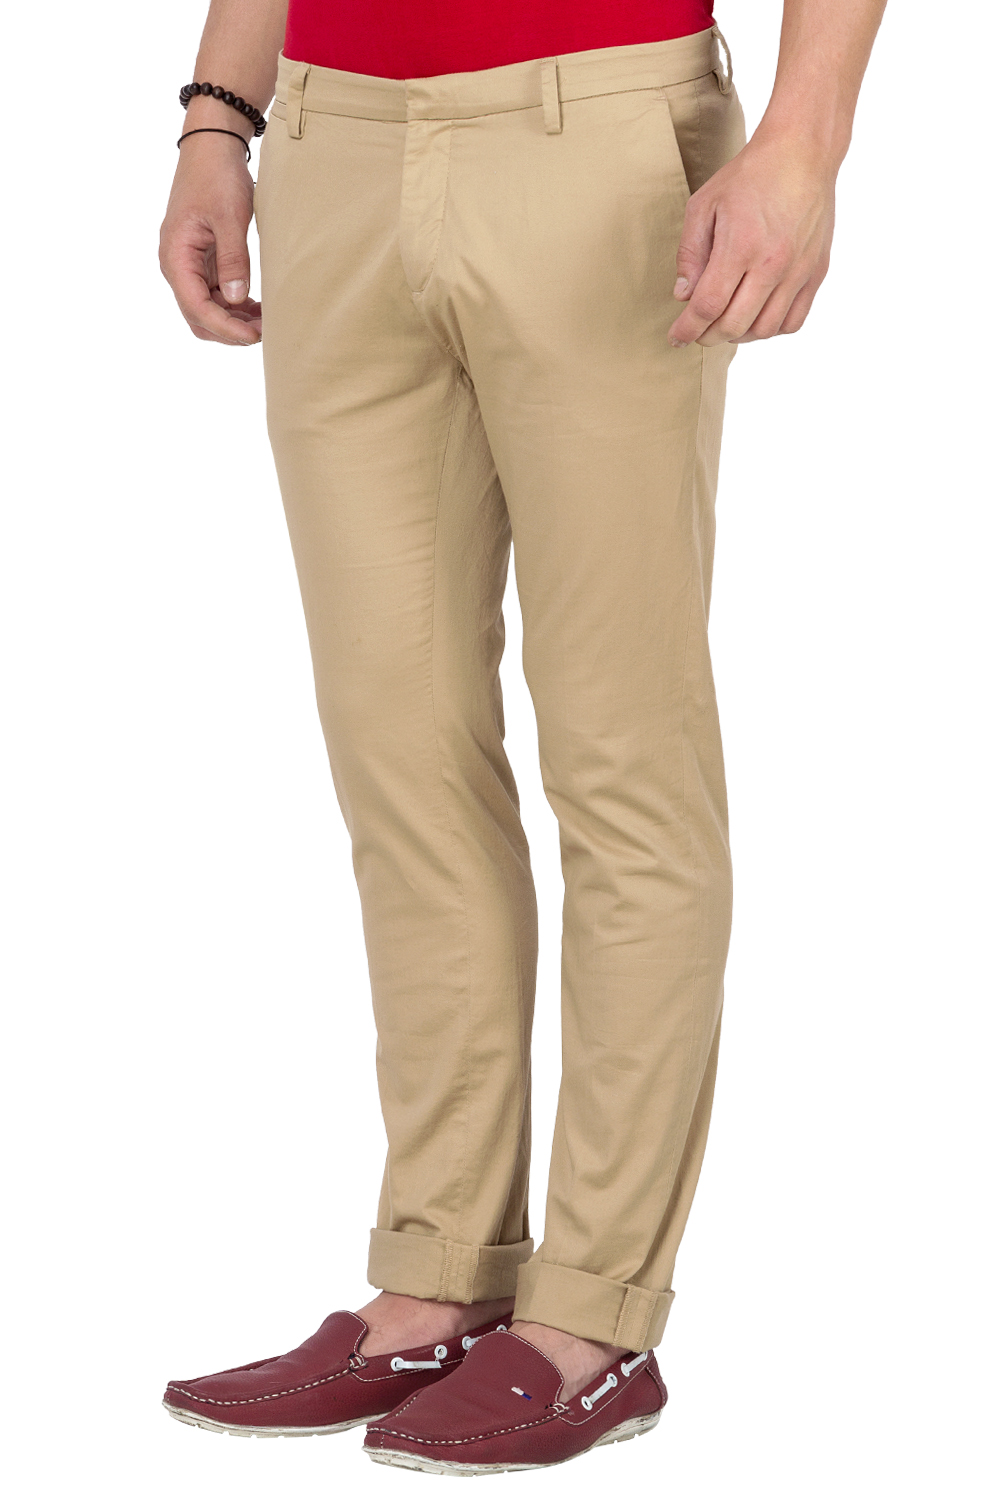 Buy Mufti Beige Slim Fit Low Rise Chinos For Men Online @ ₹769 from ...